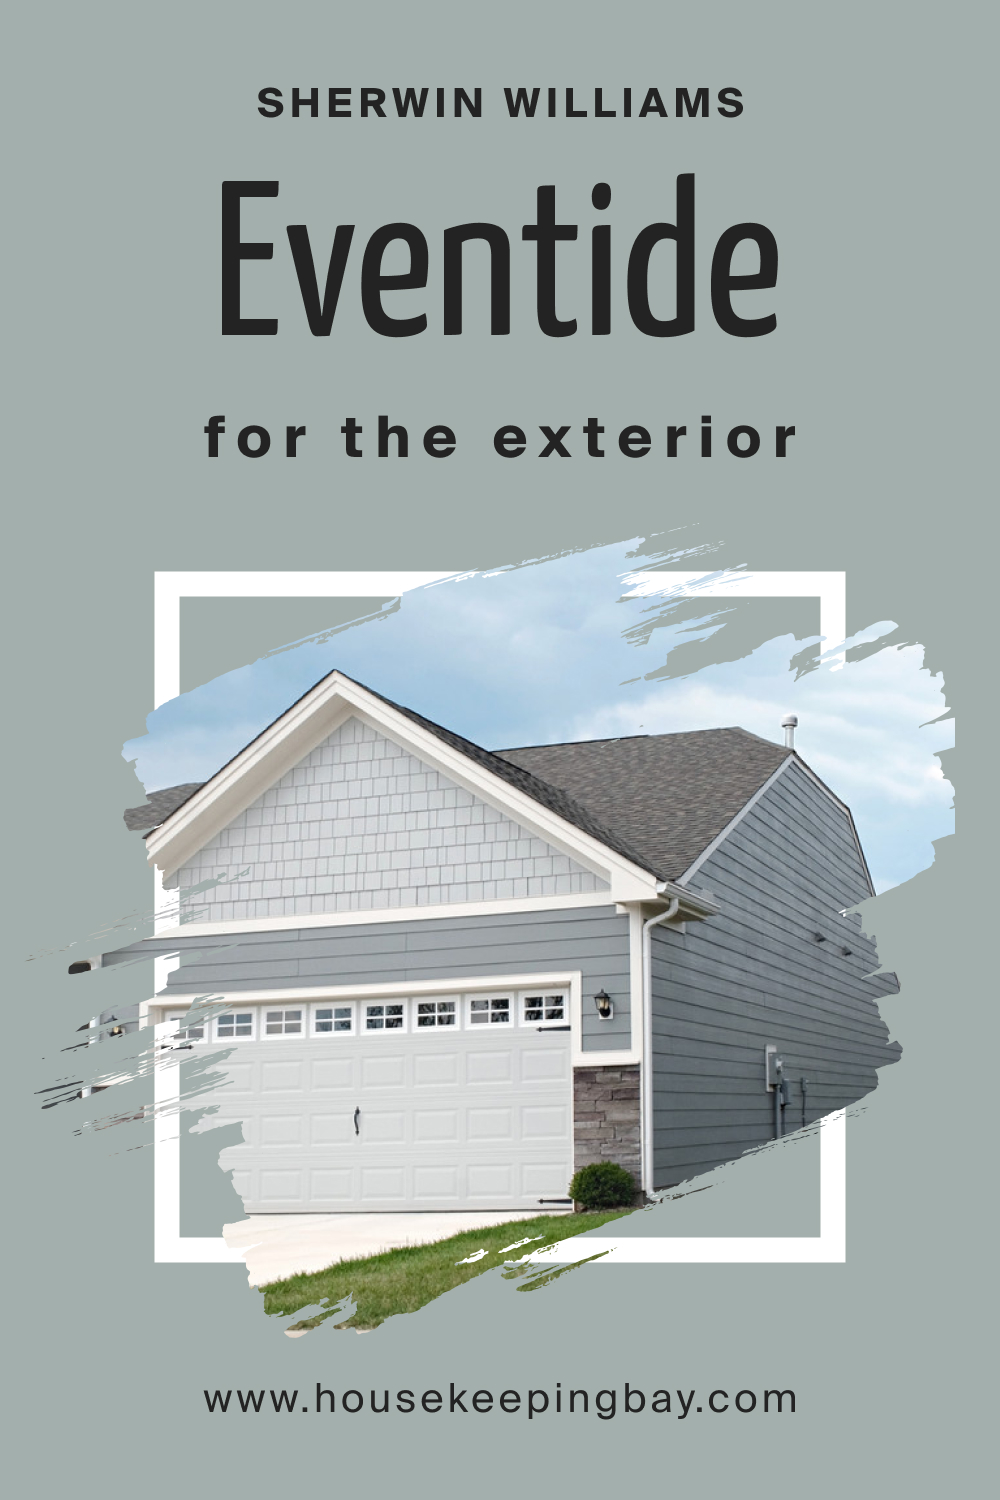 Sherwin Williams. SW 9643 Eventide For the exterior